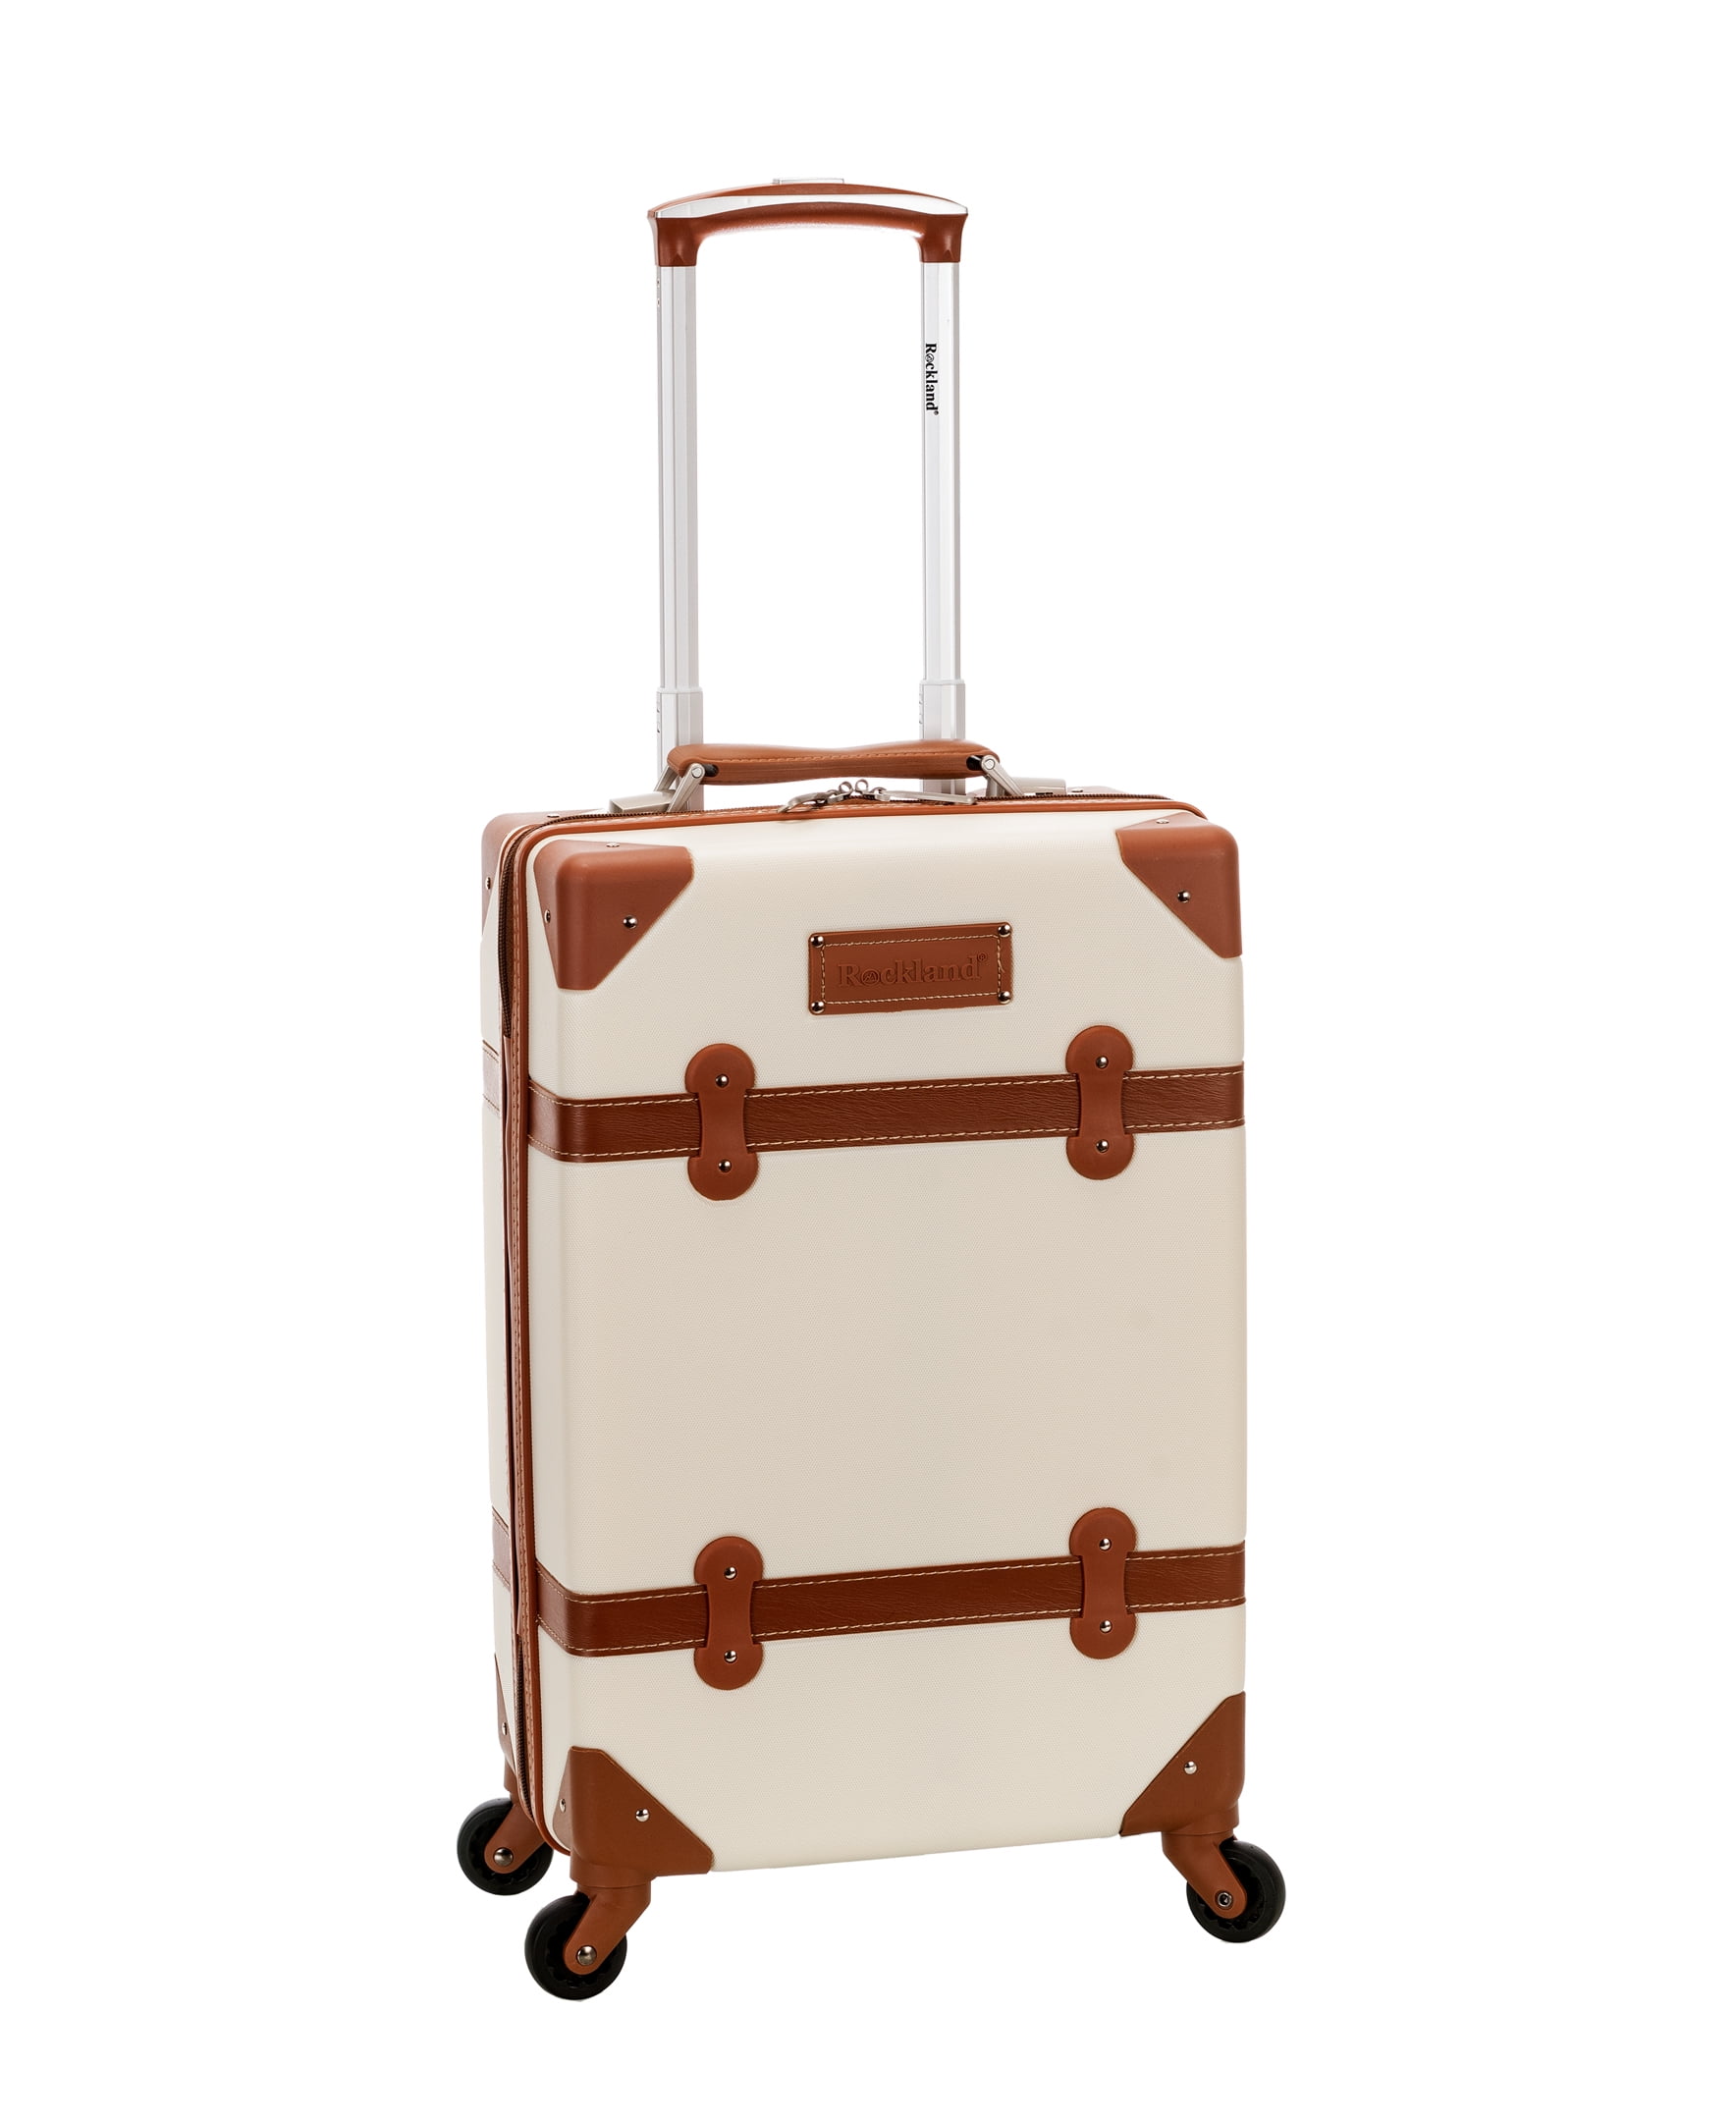 Rockland Luggage Stage Coach Hardside Rolling Trunk, F2291 